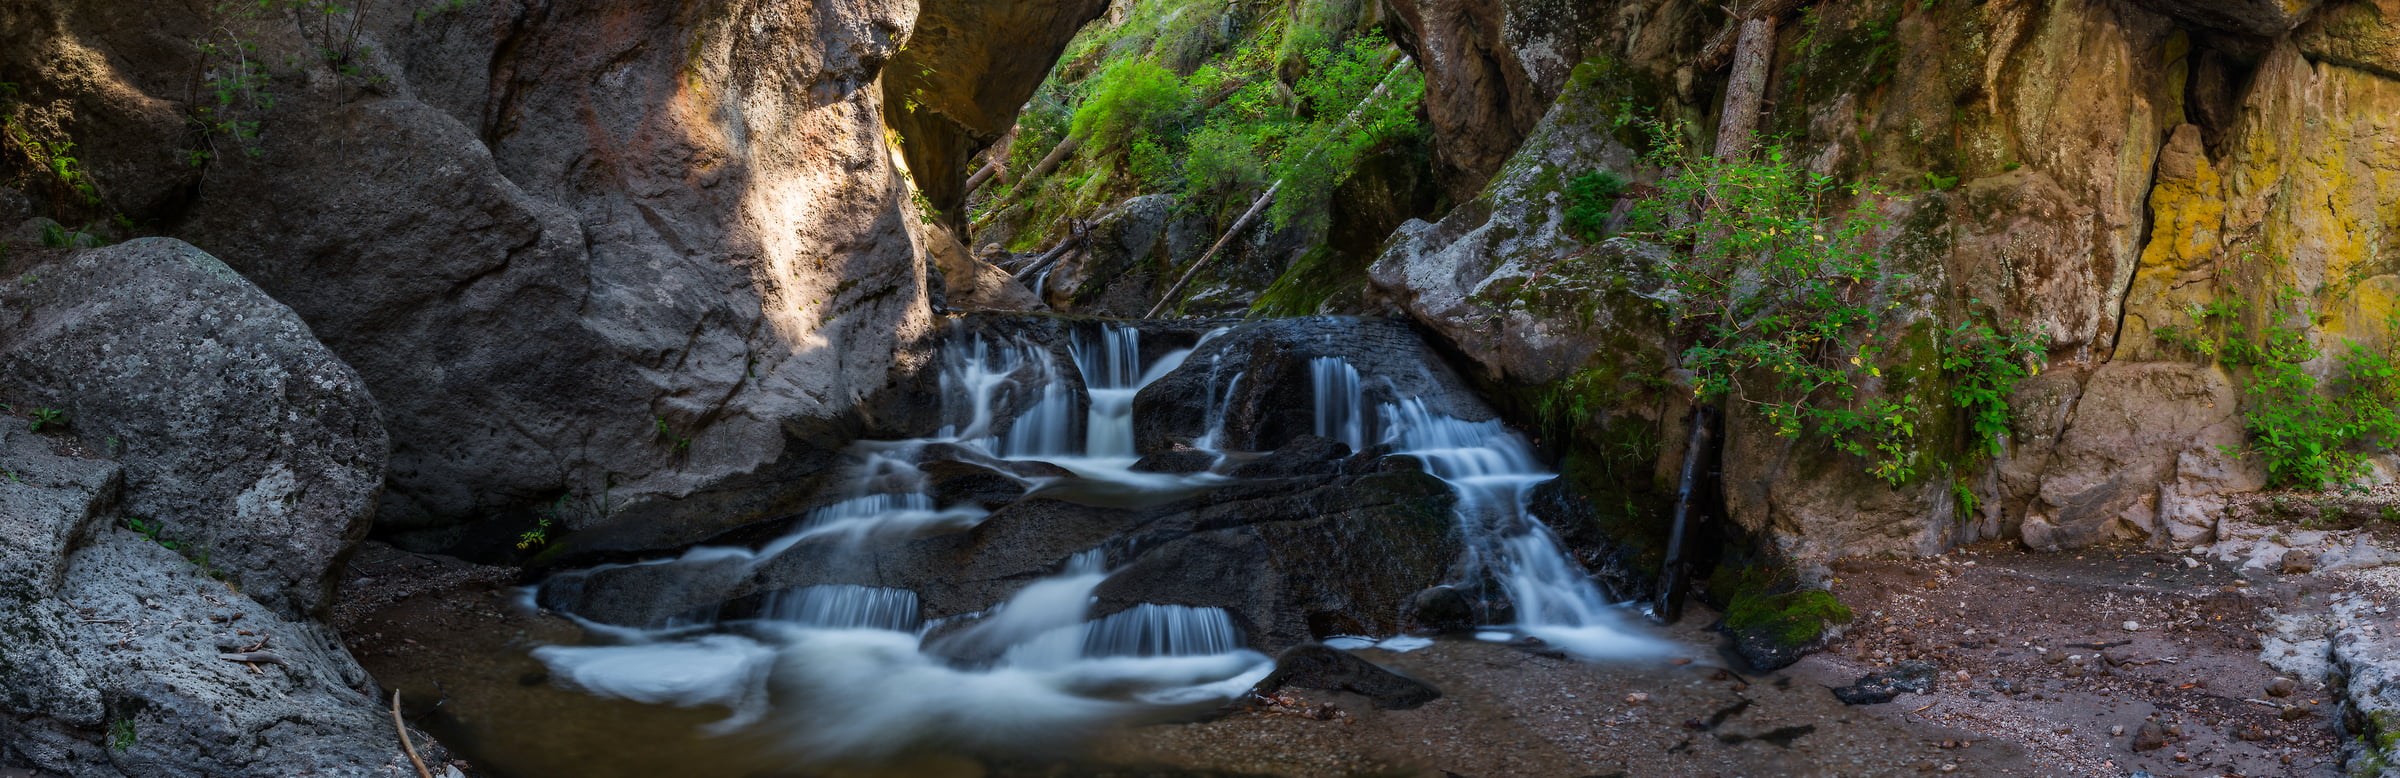 106 megapixels! A very high resolution, large-format VAST photo print of falling water over rocks; nature photograph created by Phillip Noll in Jemez Mountains, New Mexico.